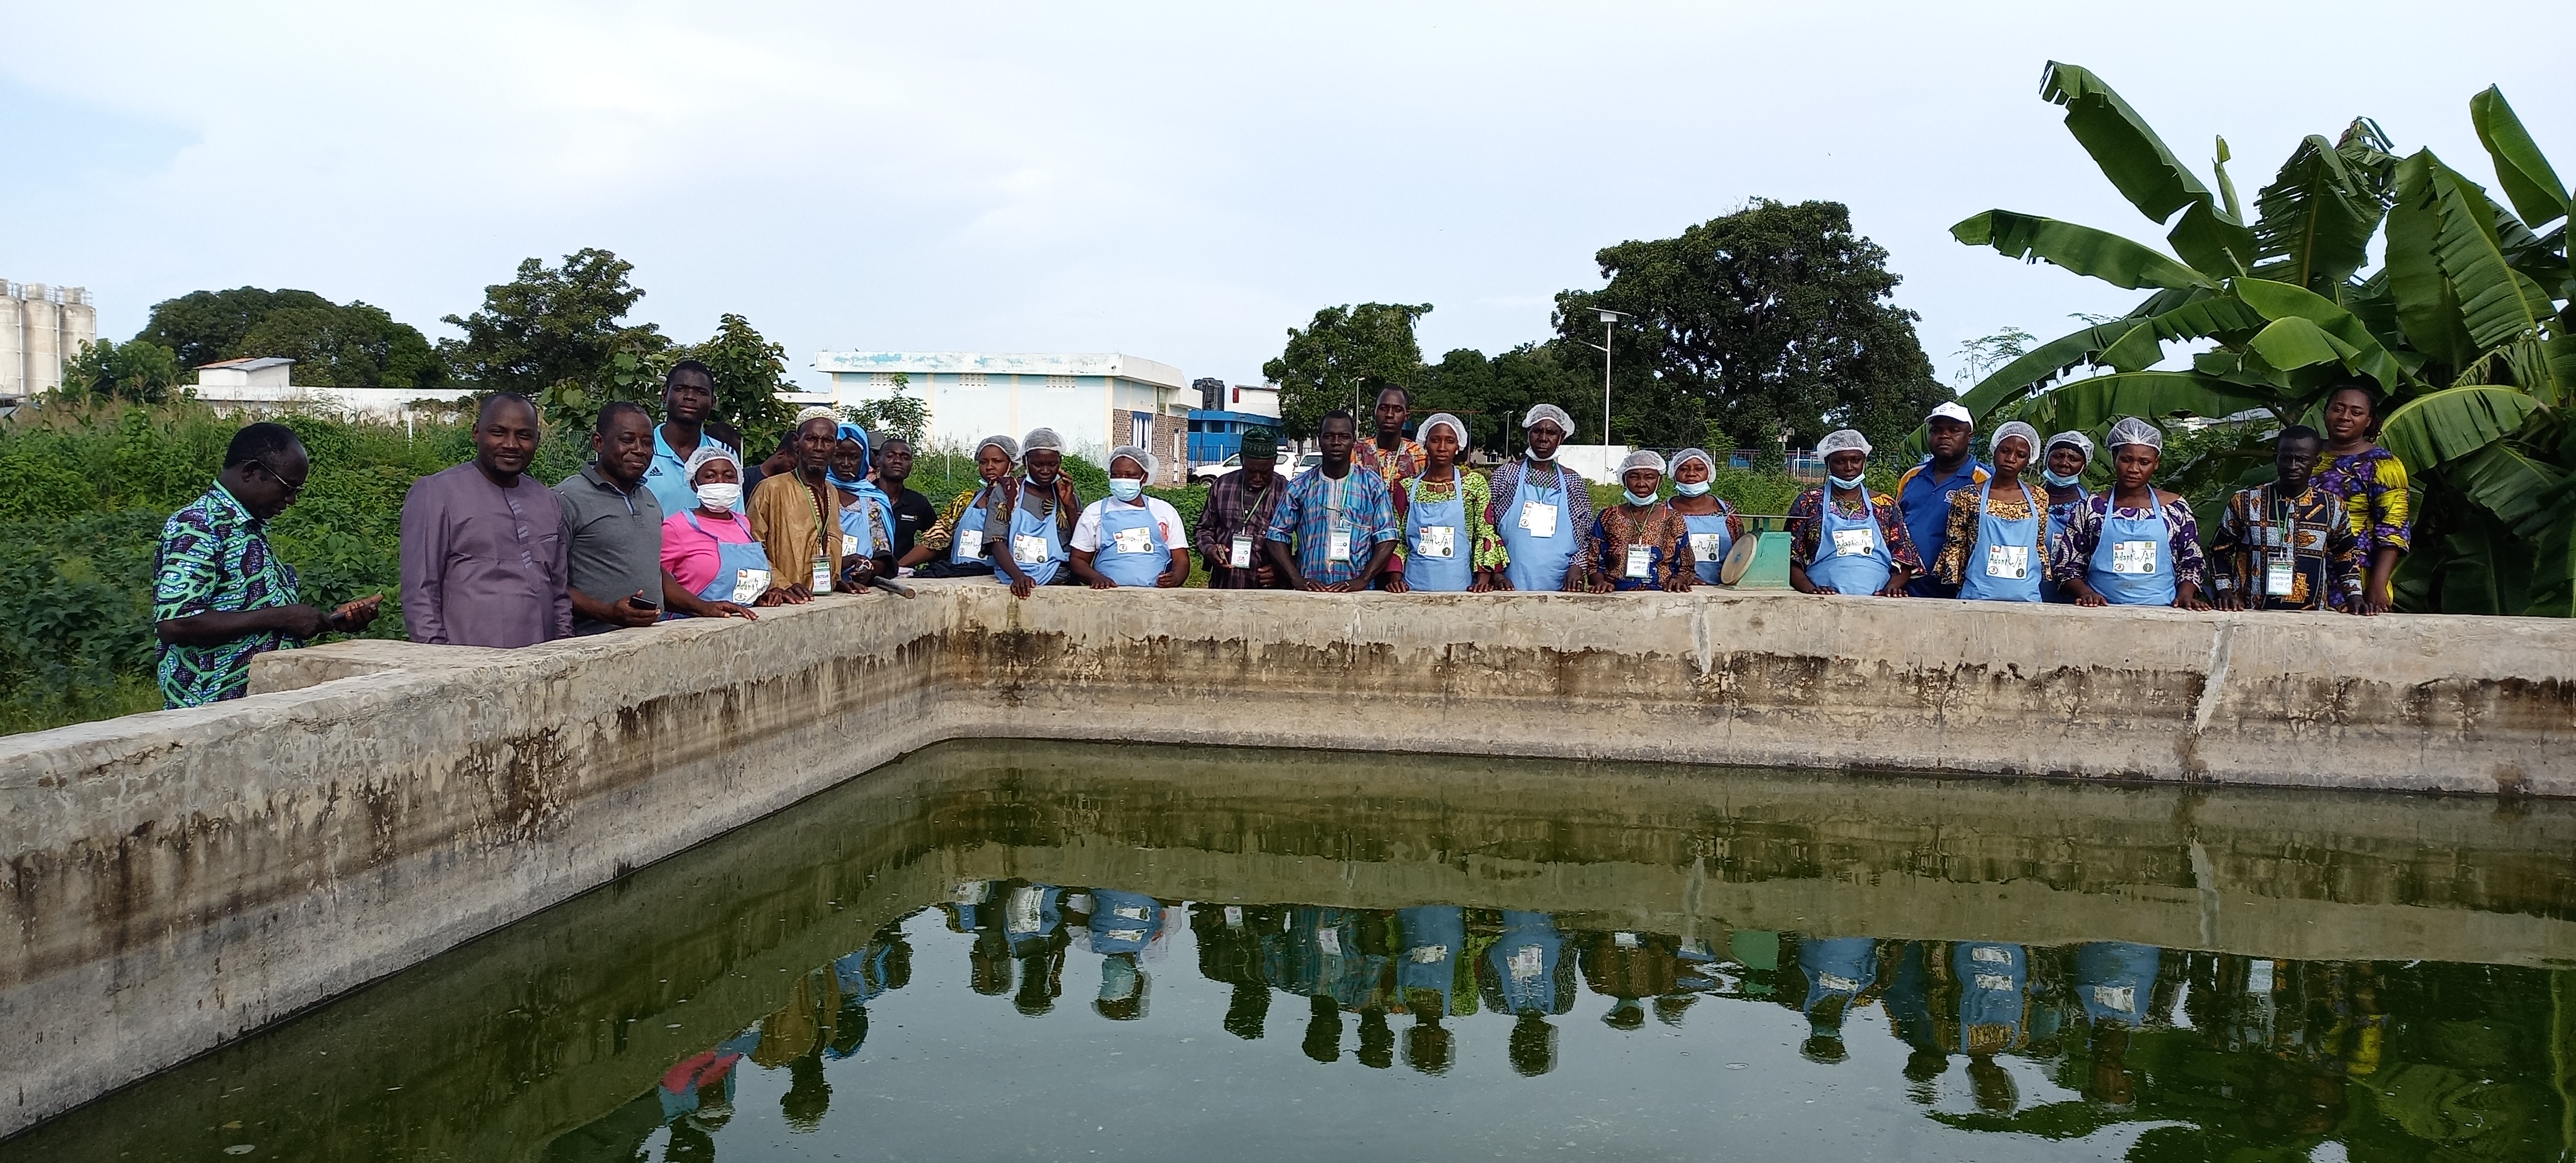 AdaptWAP project - Benin, training on sustainable management of fishing resources 